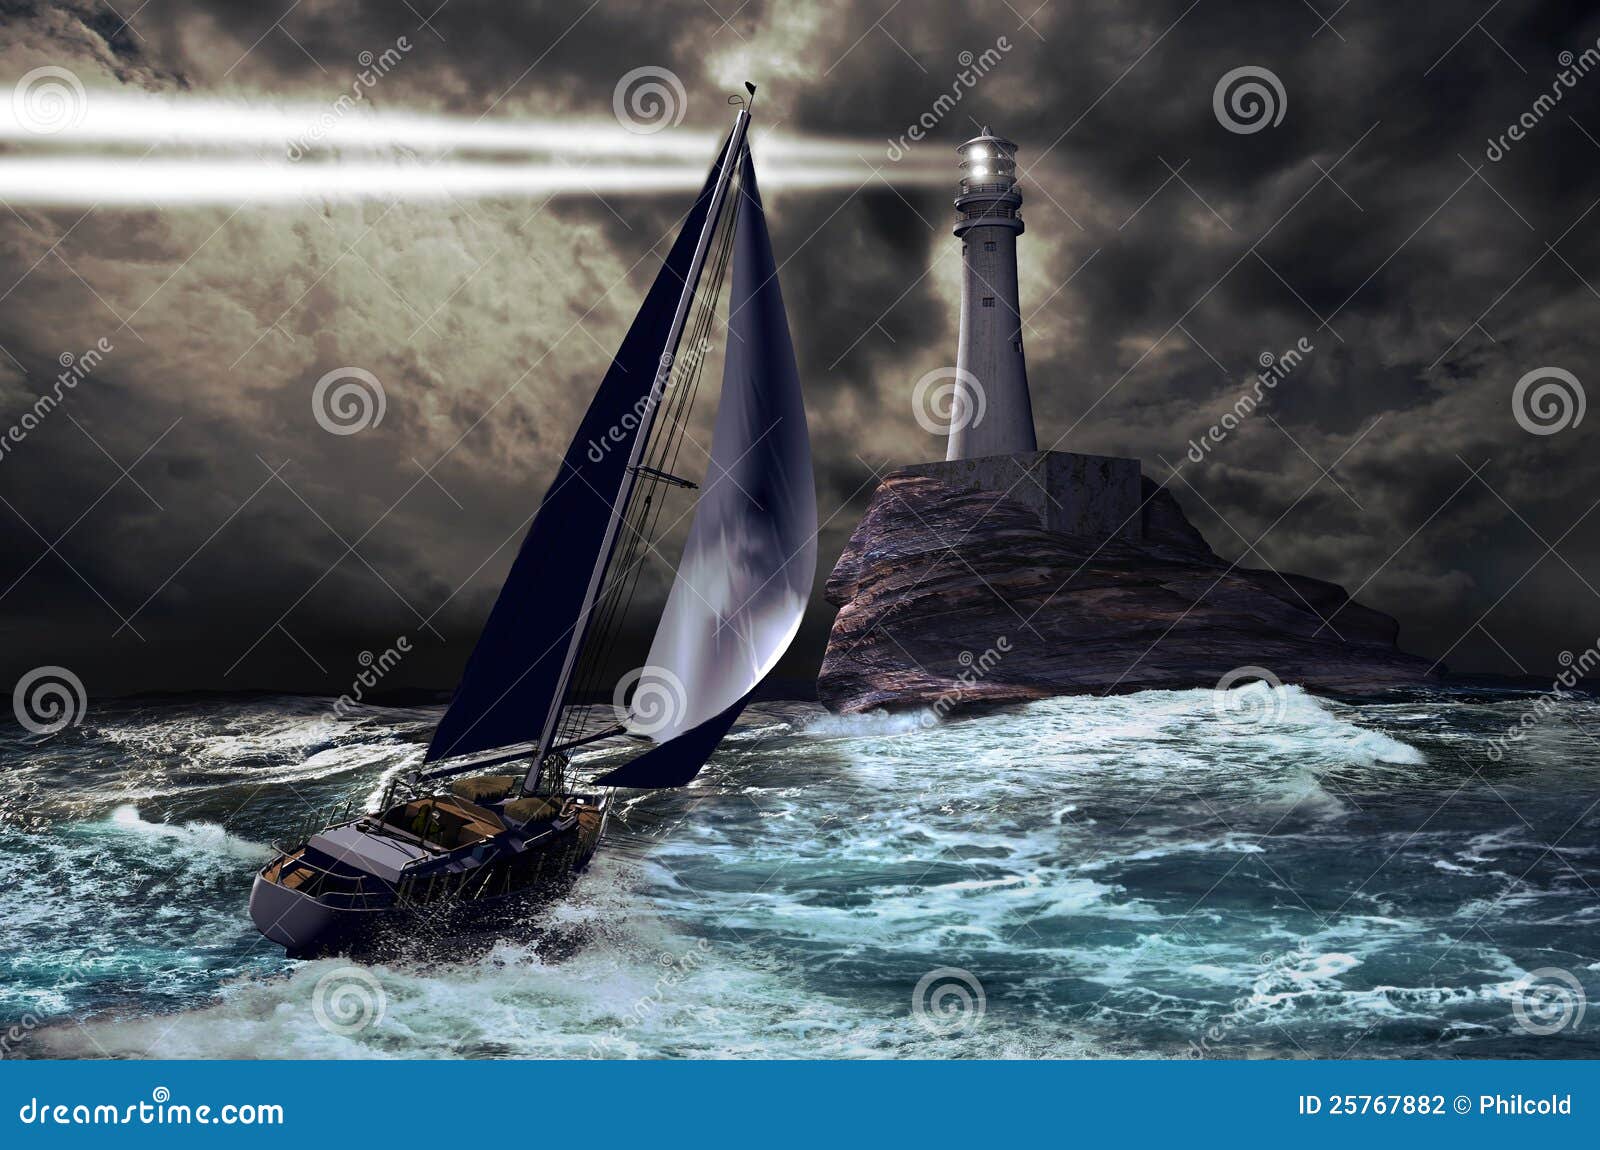 Lighthouse And Sailboat Stock Photography - Image: 25767882